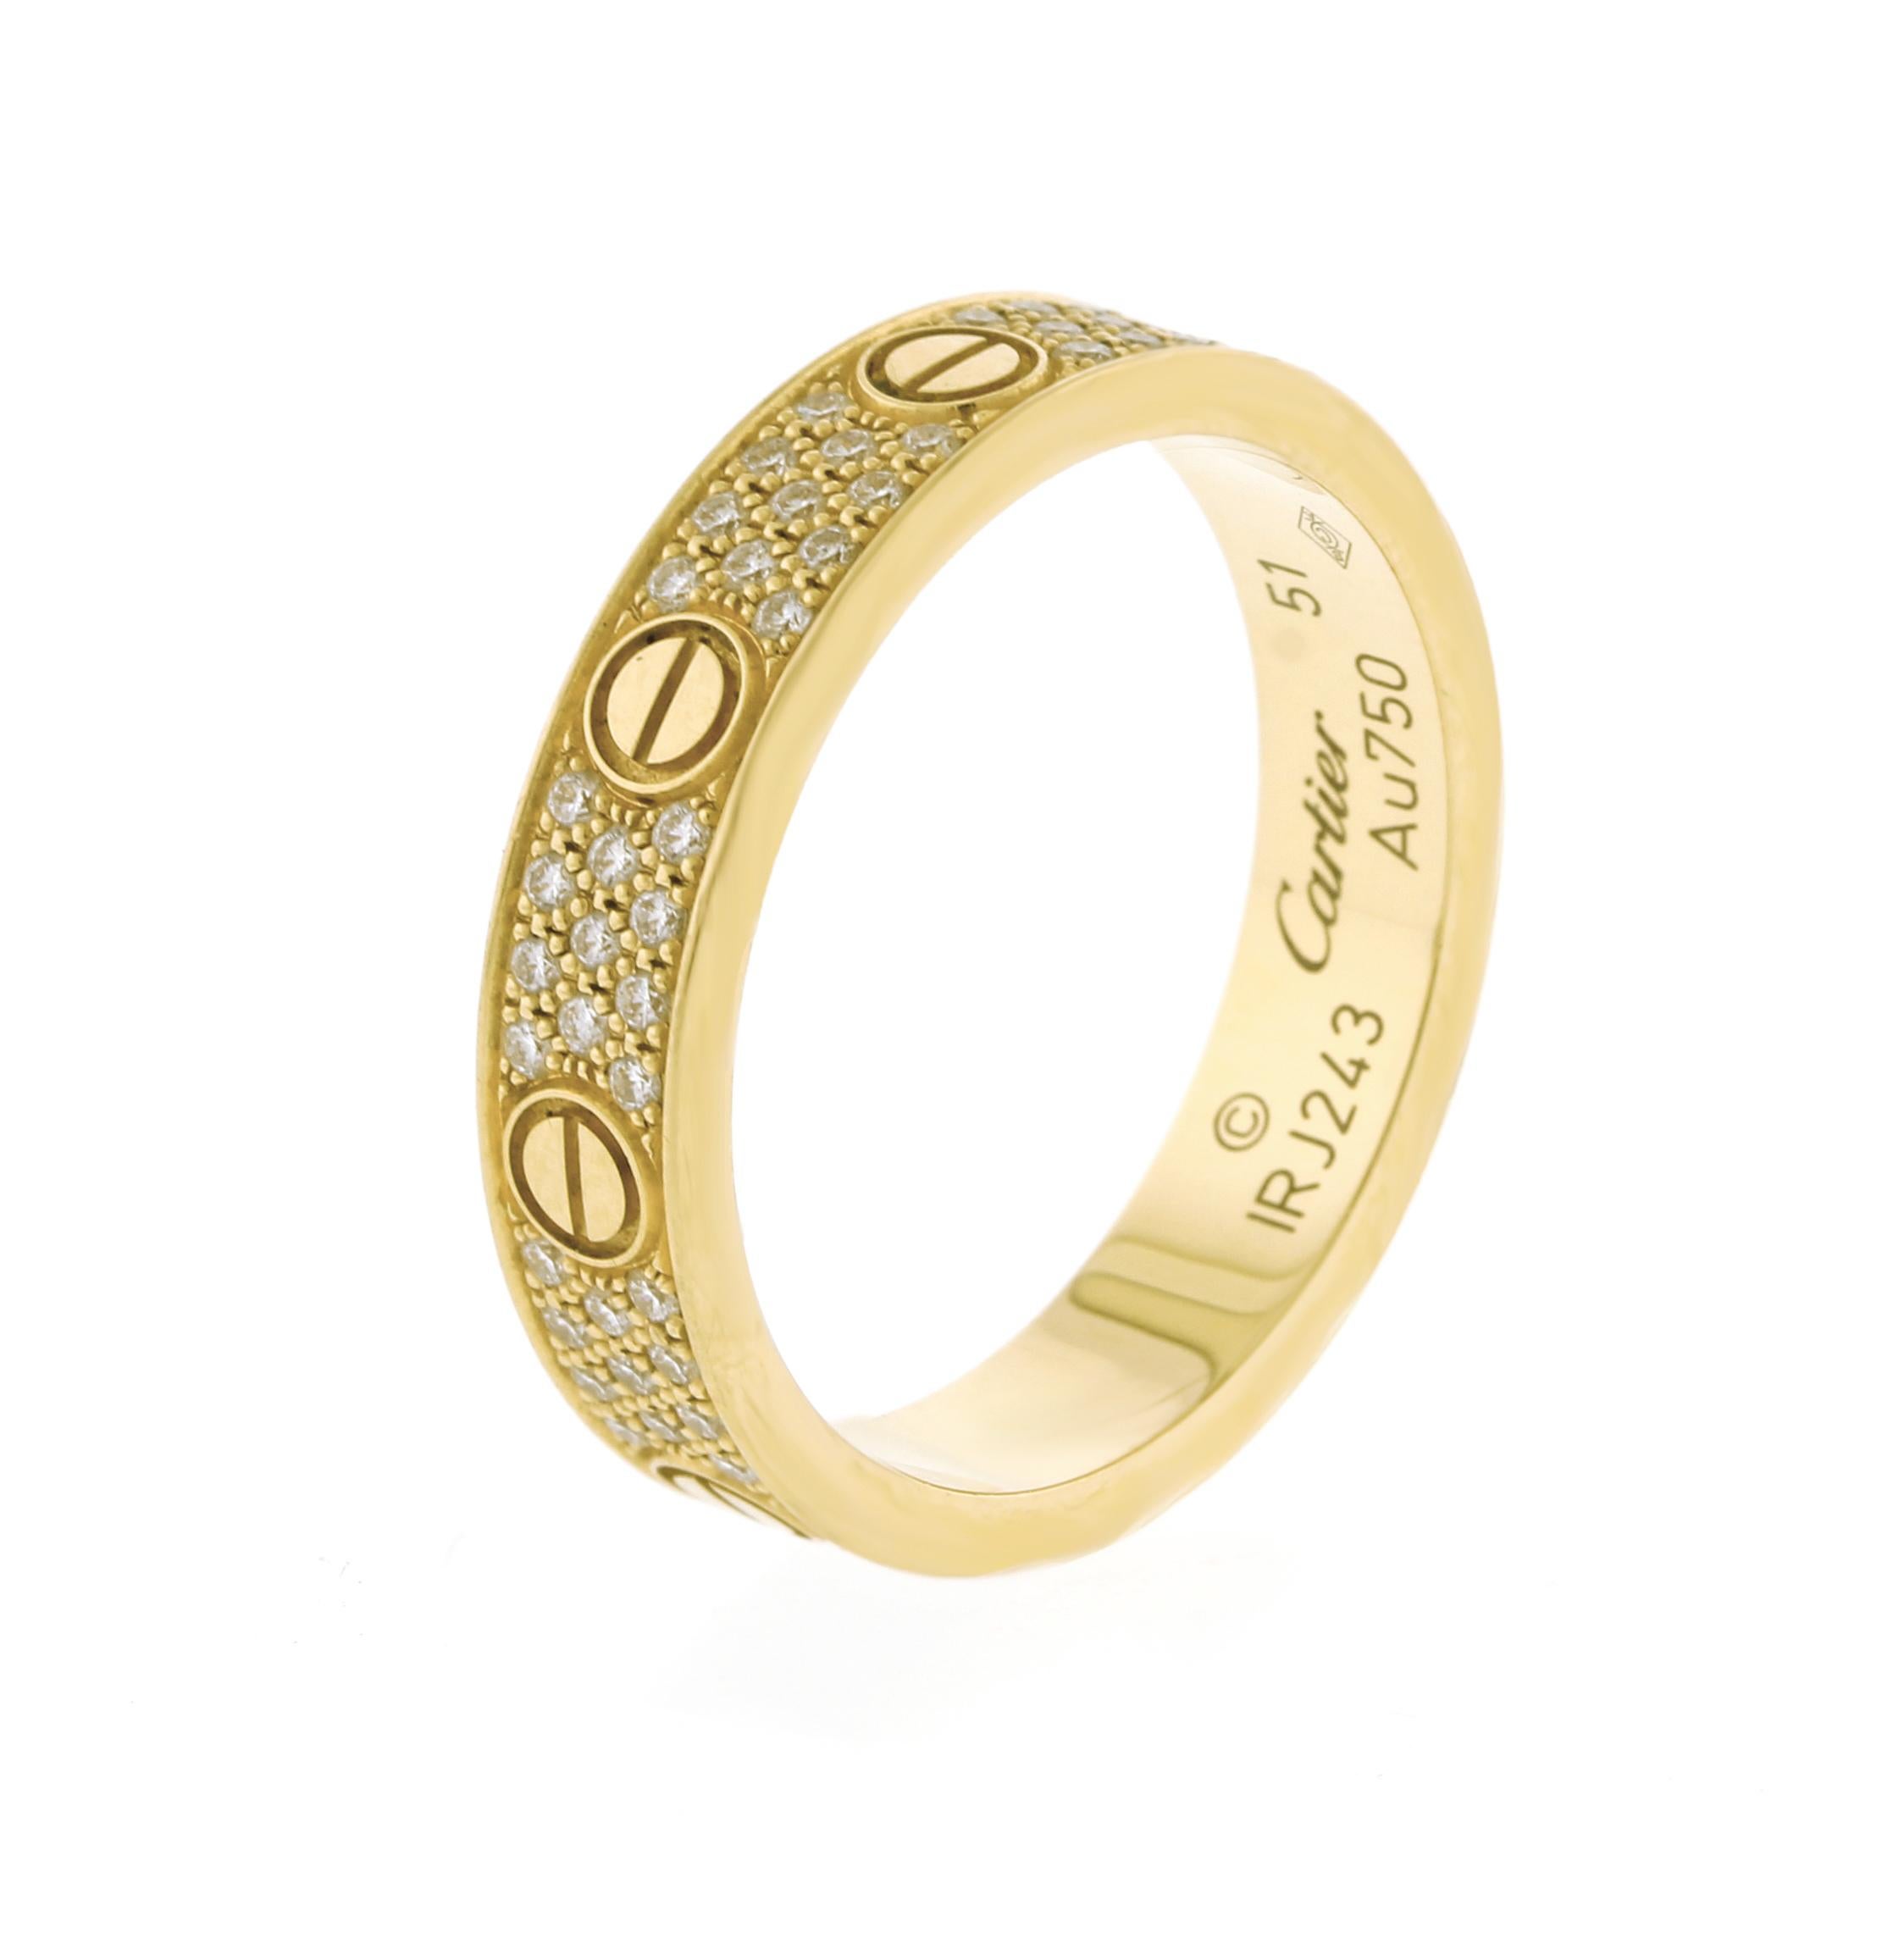 Love band, 18K yellow gold, set with 88 brilliant-cut diamonds totaling 0.31 carats. 4 mm width, size 51   5¾.  Never worn, in as new condition, purchased  December 2020 as a gift

 A child of 1970s New York, the LOVE collection remains today an